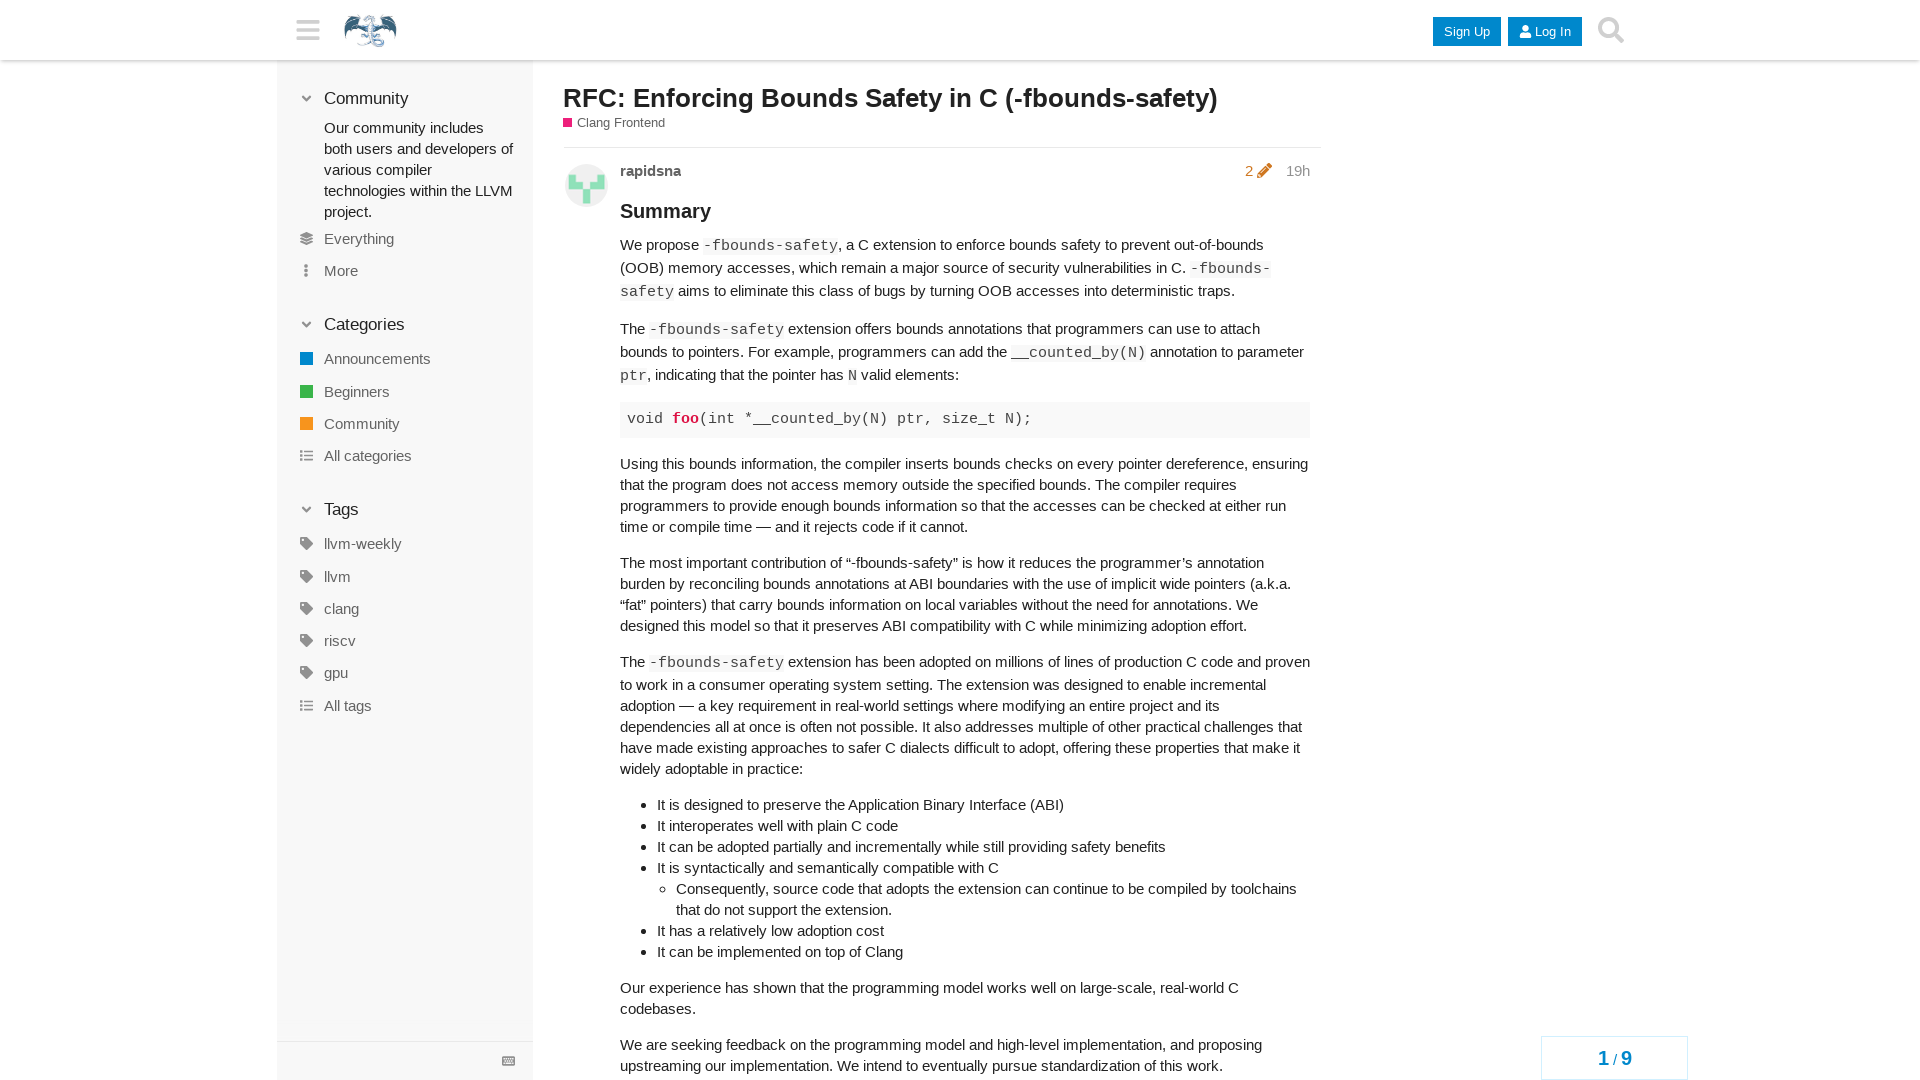 RFC: Enforcing Bounds Safety in C (-fbounds-safety) - Clang Frontend - LLVM Discussion Forums